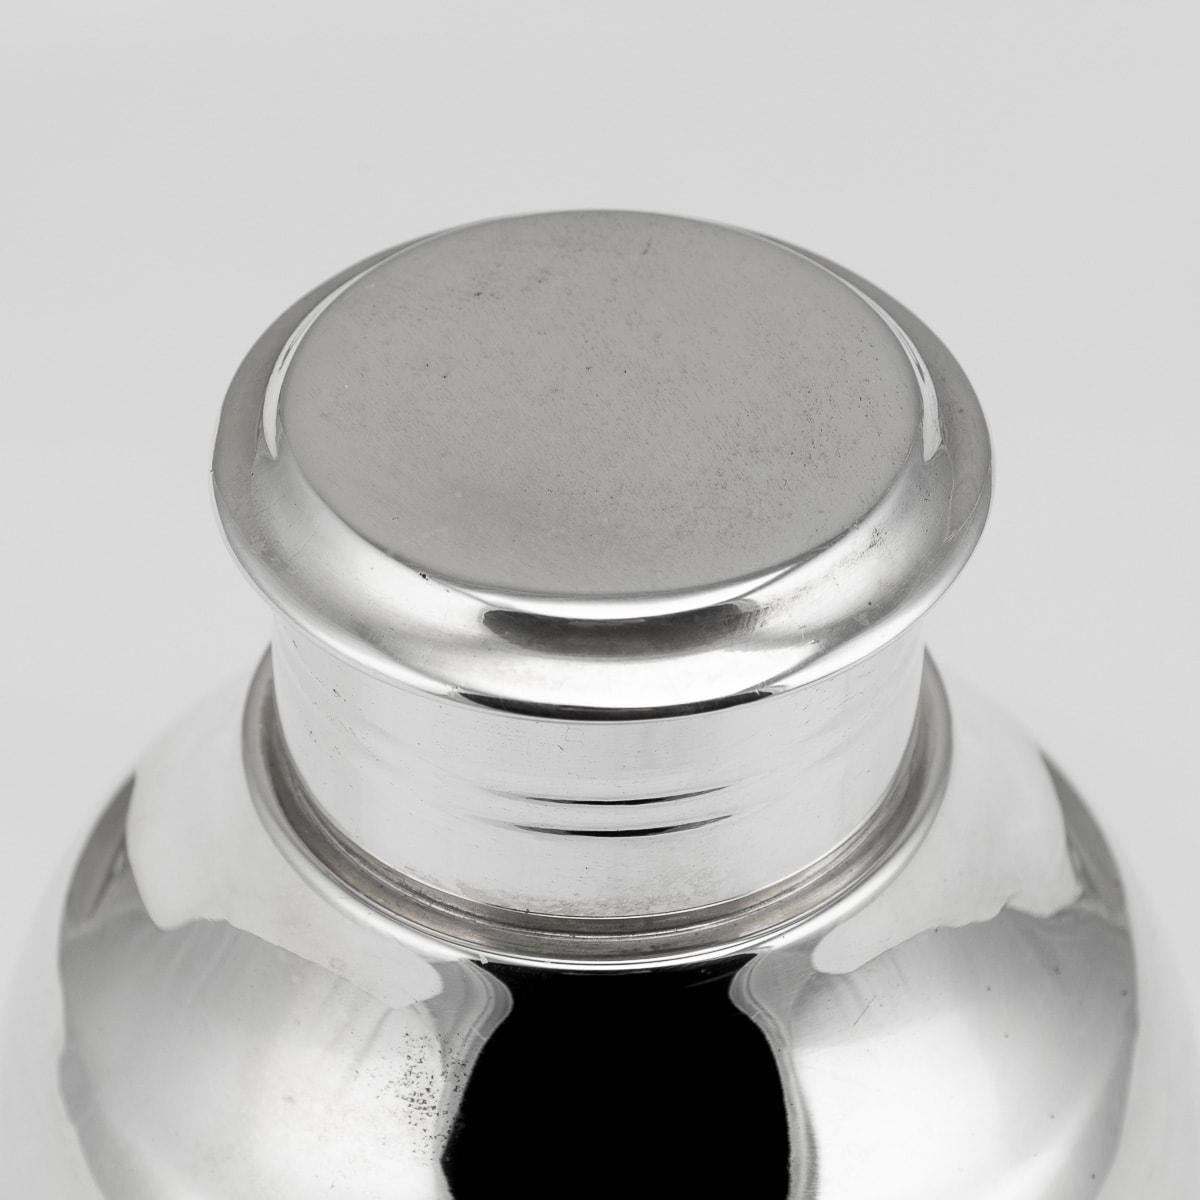 Metal 20th Century Silver Plated Art Deco Cocktail Shaker By Christofle, France c.1950